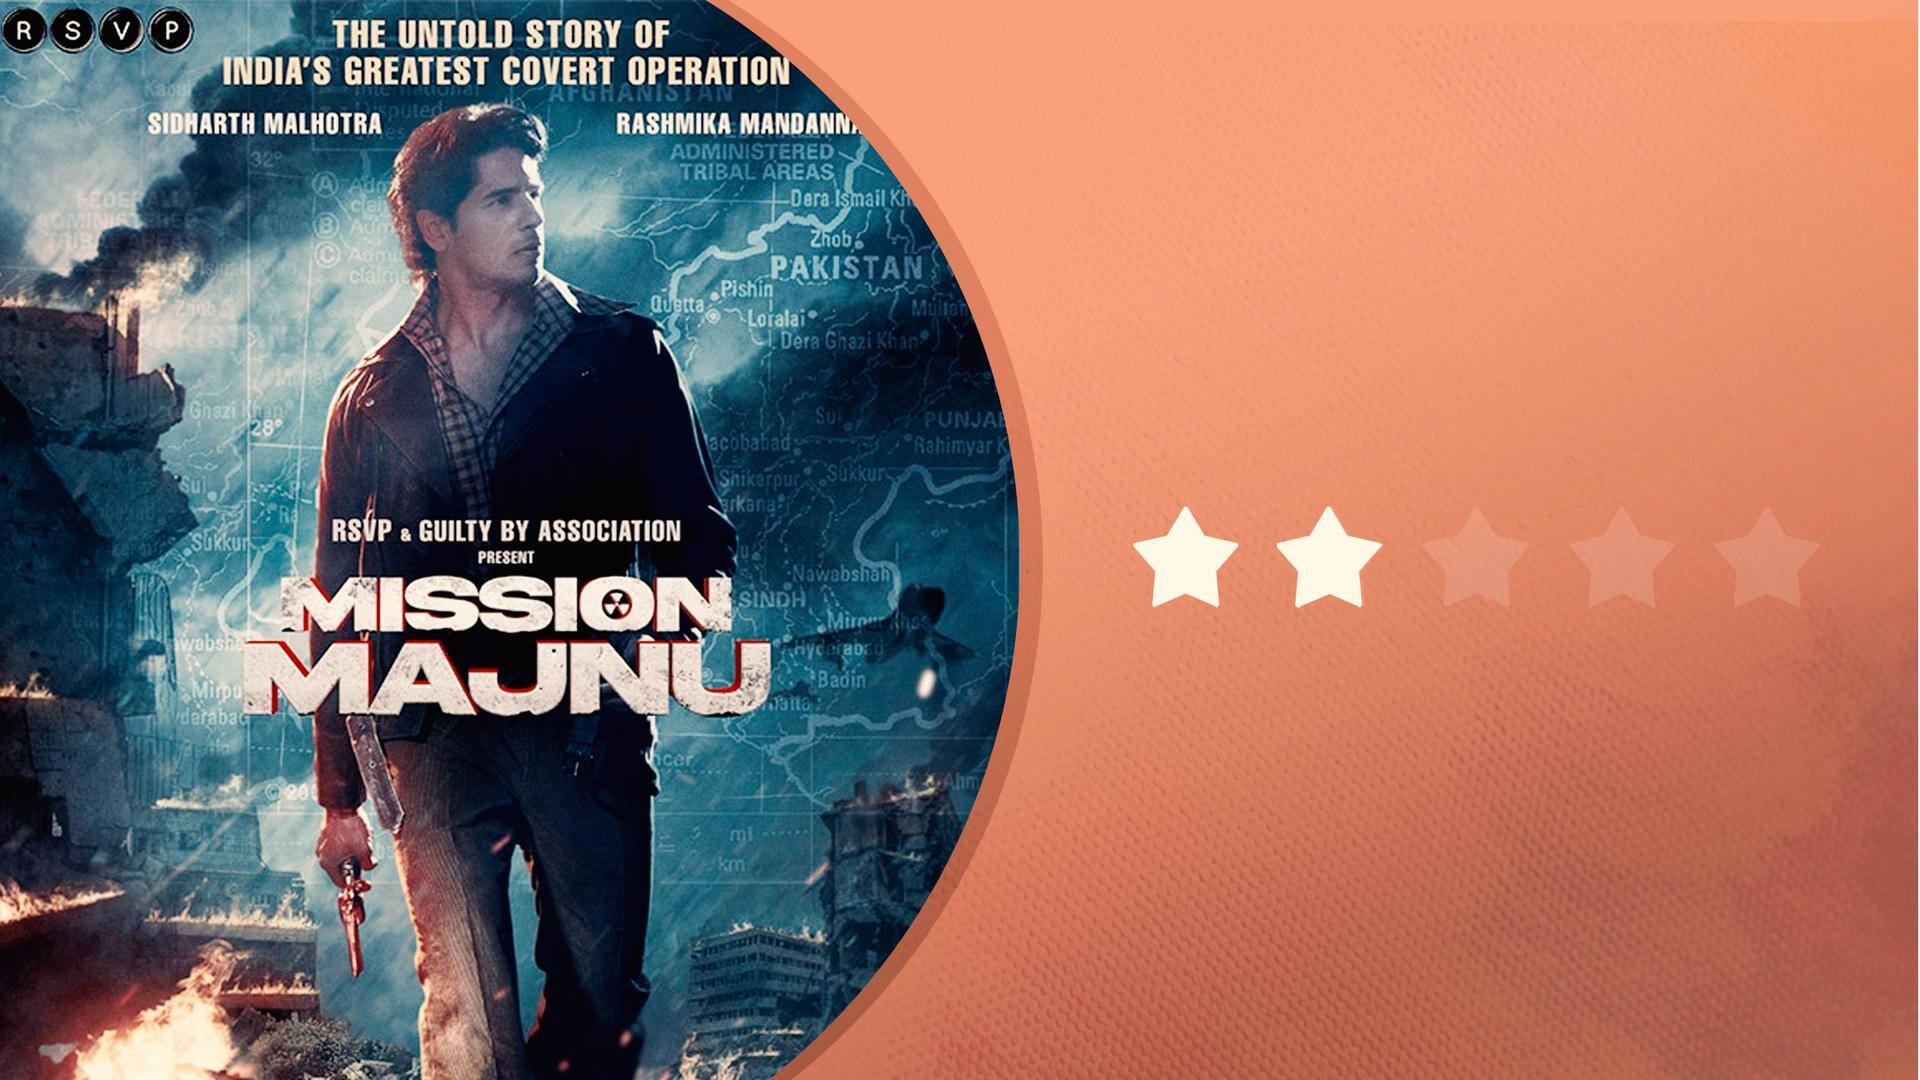 'Mission Majnu' review: Bland watch lacks thrills, excitement, and intrigue